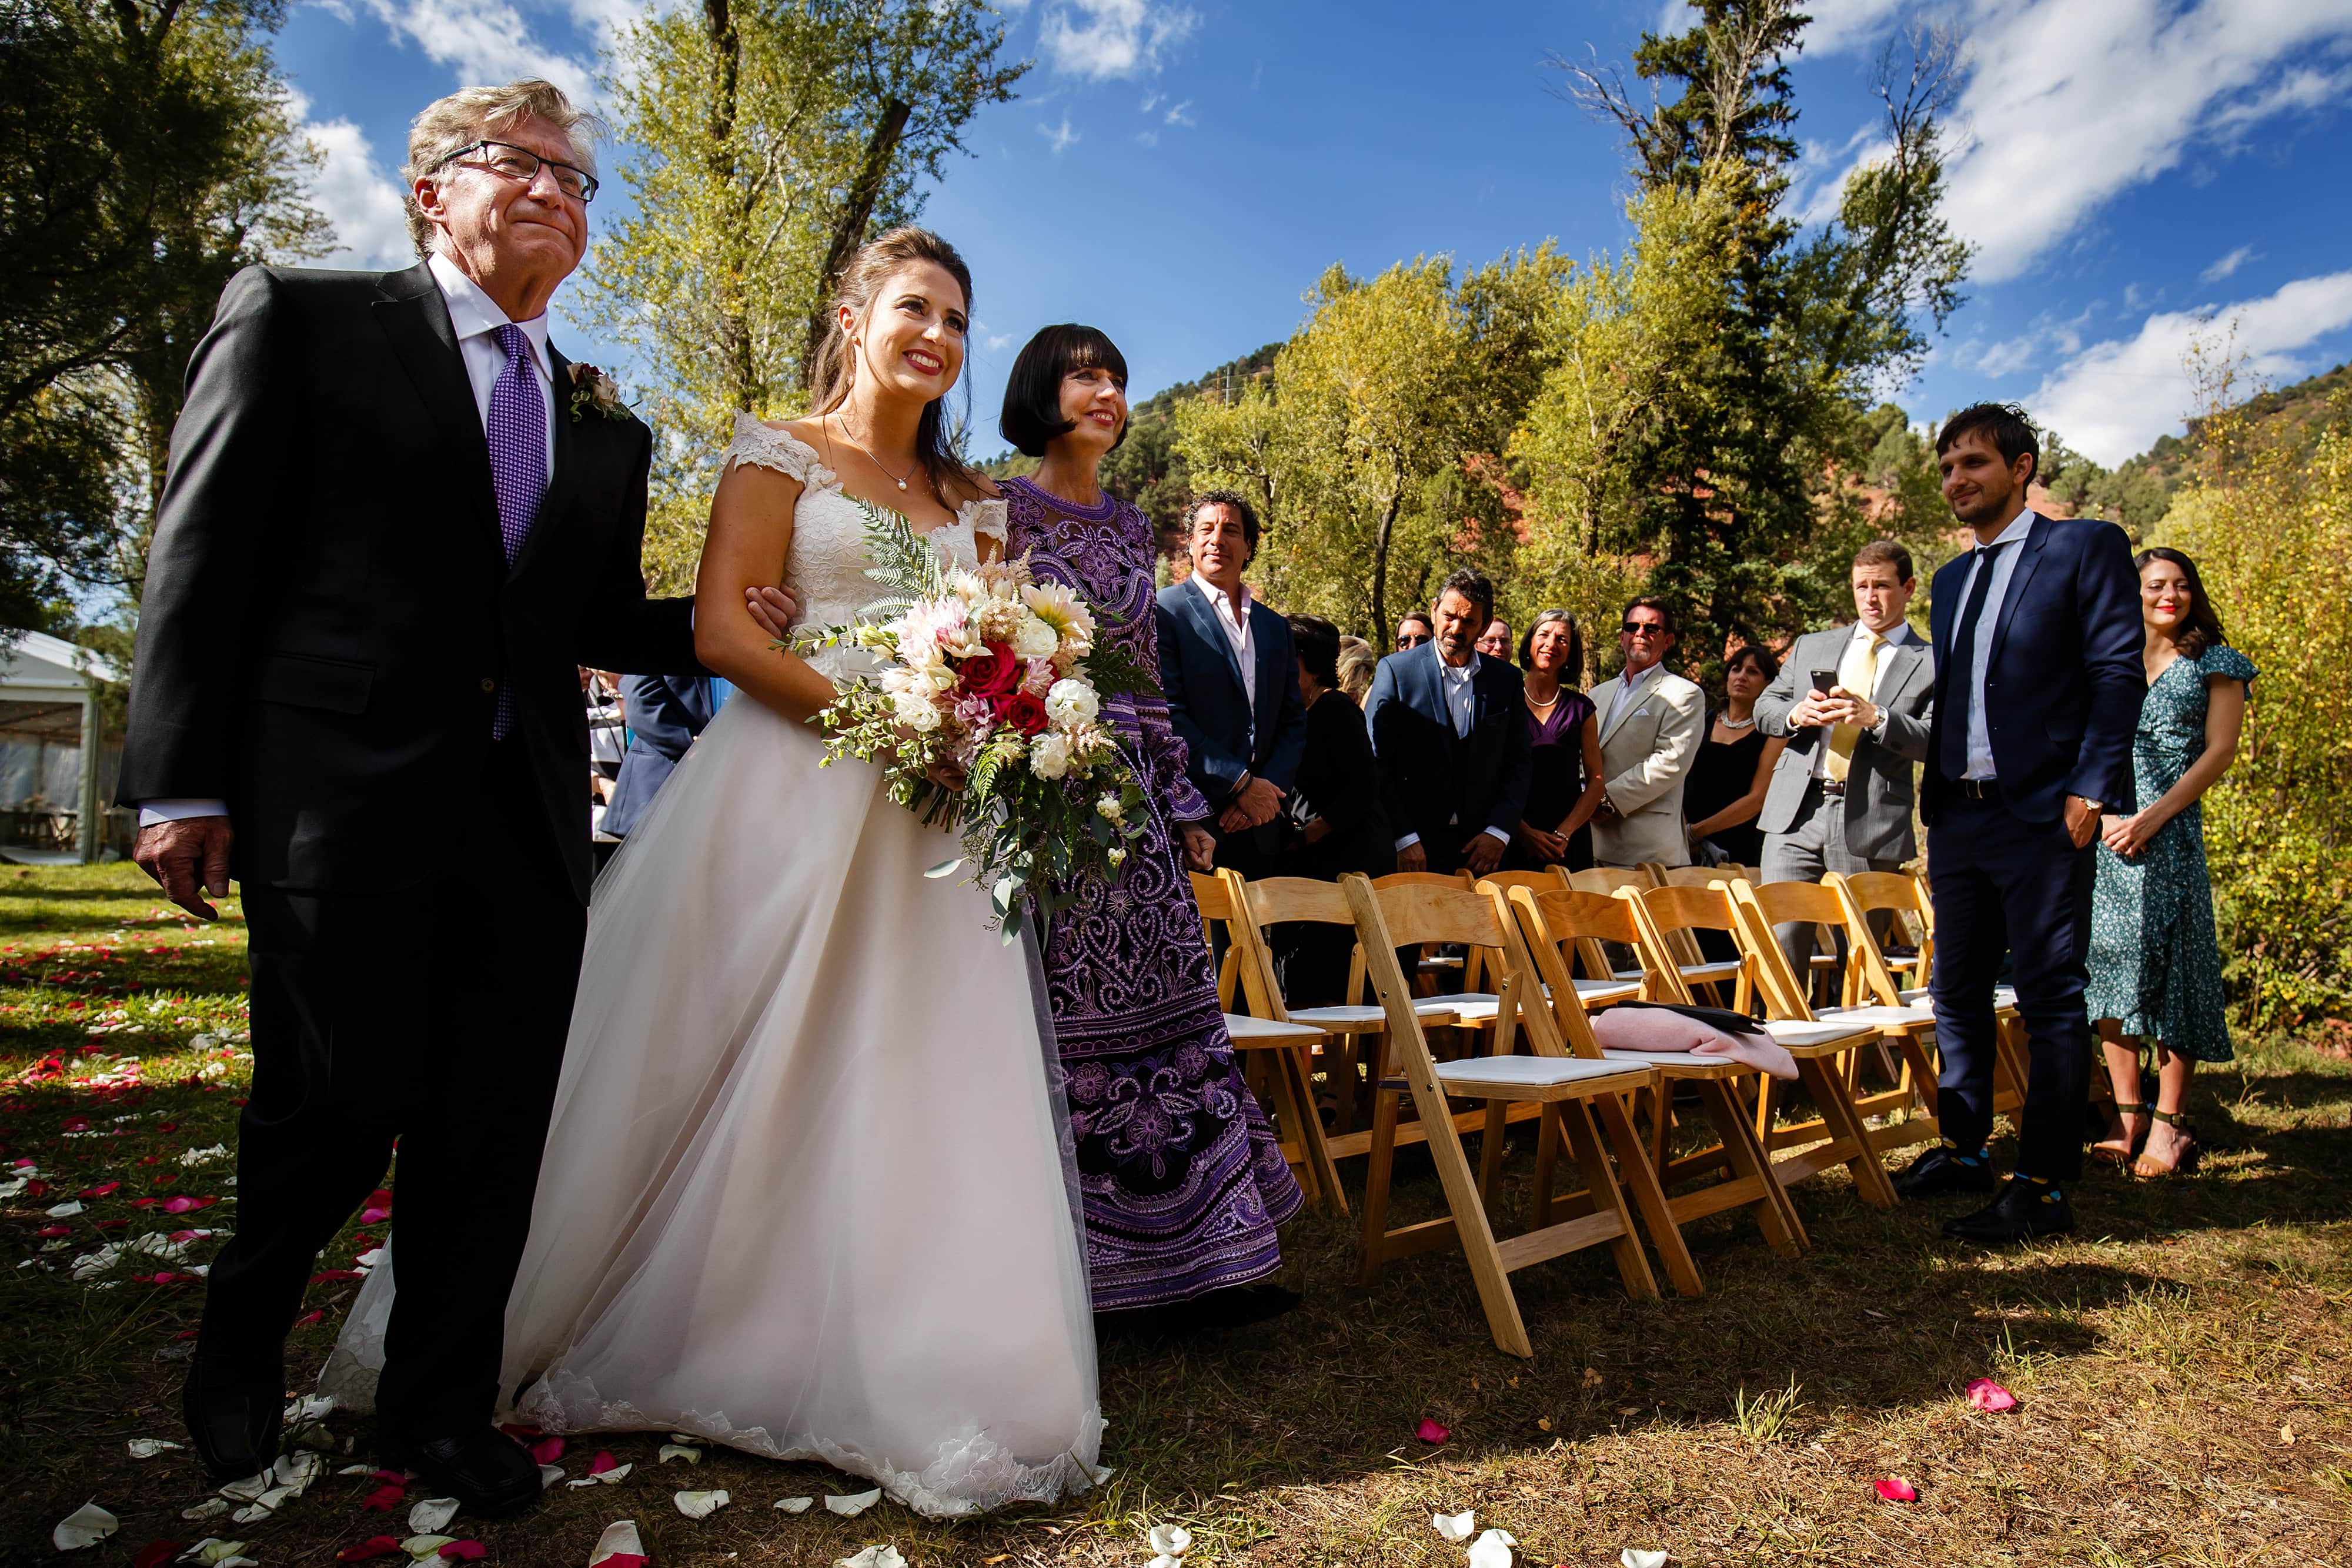 Mallory walks down the aisle as a stunning bride with her parents during the Snowmass Cottages wedding ceremony